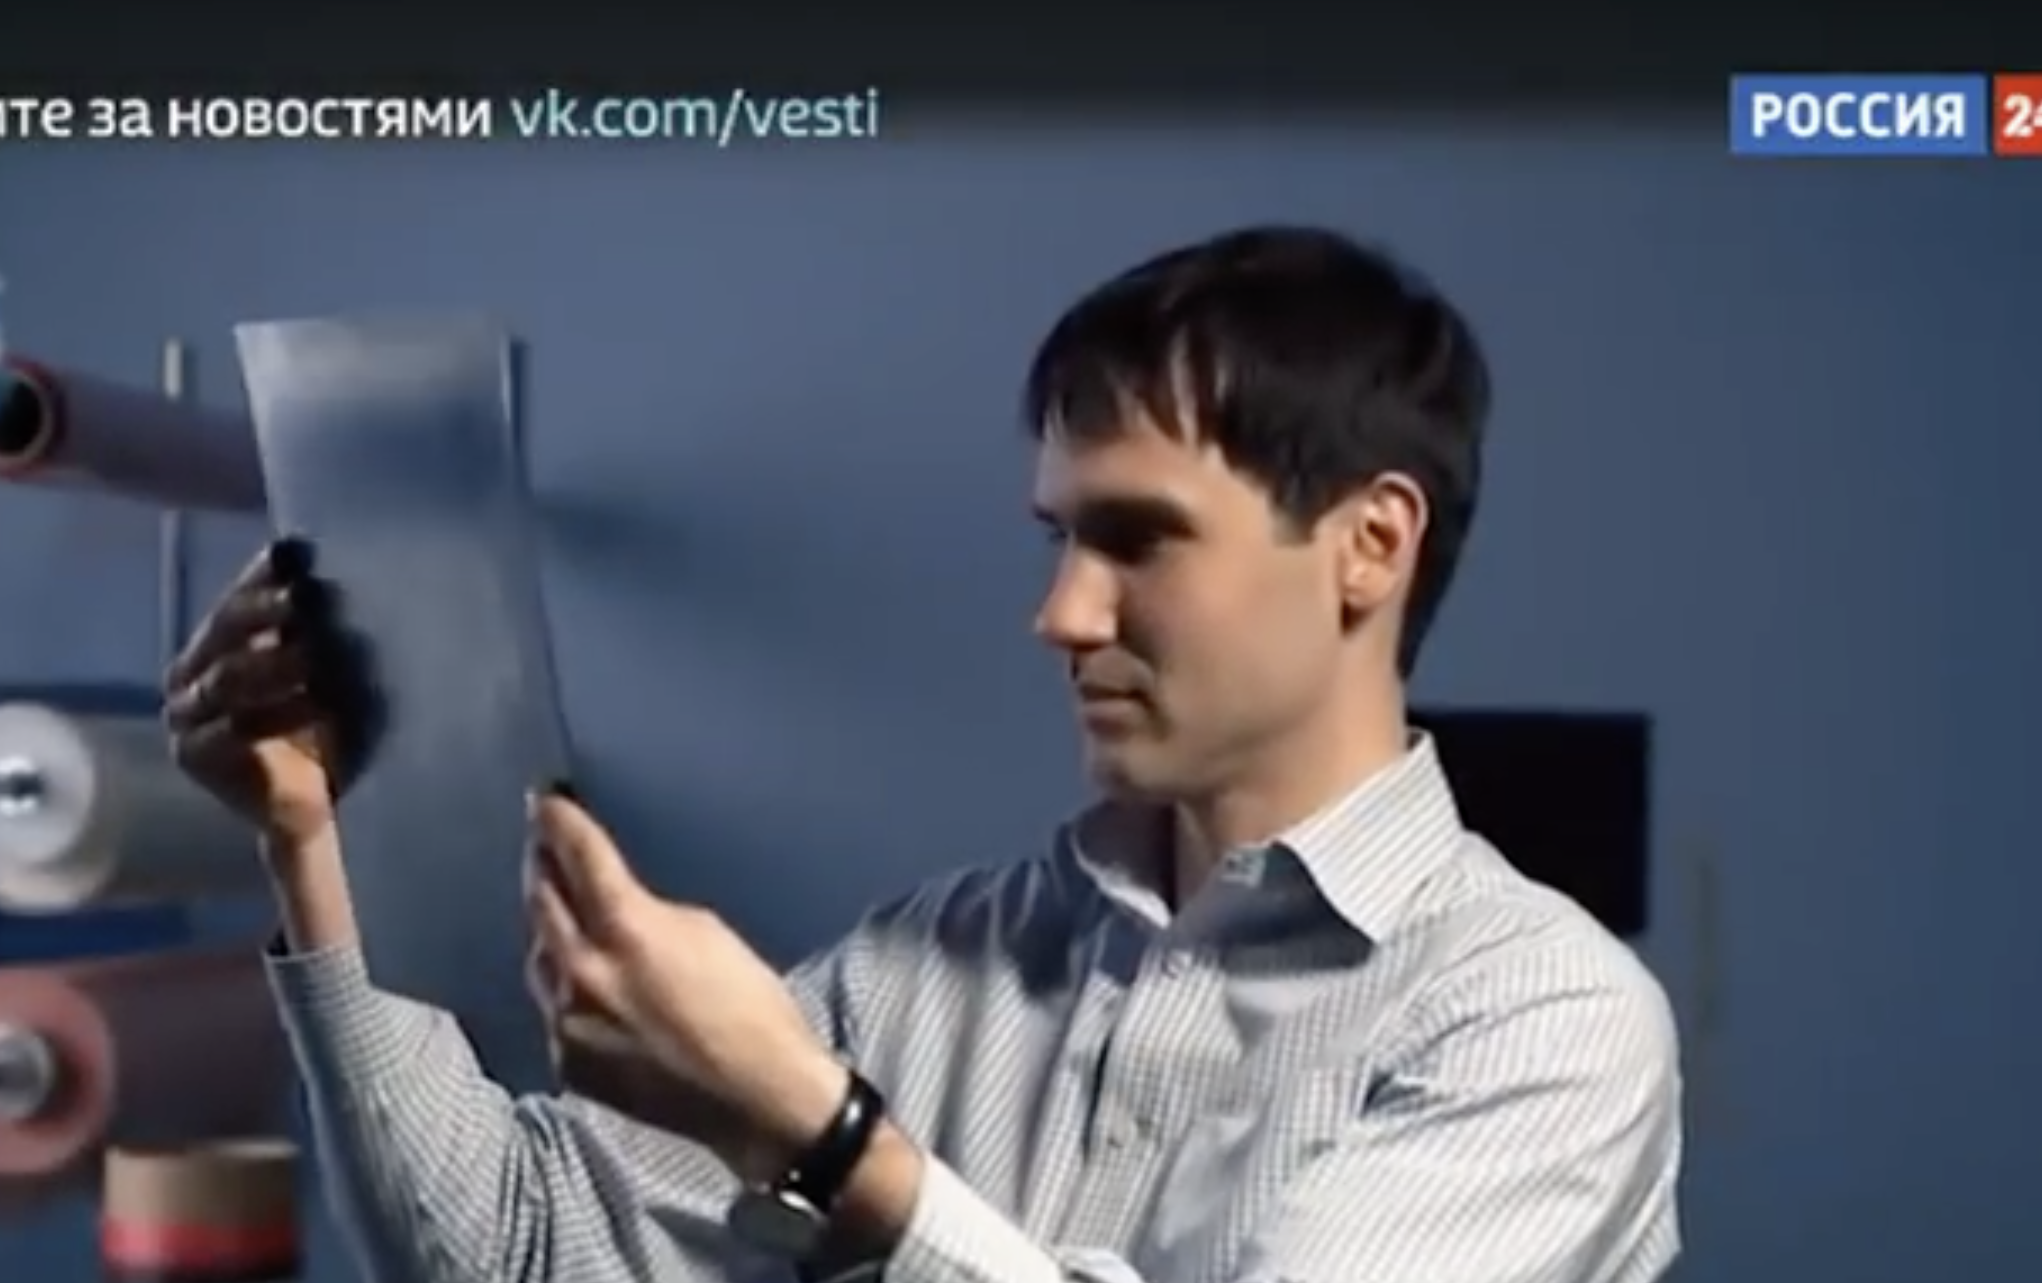 Russia24 report about our company in the program "Science": new materials